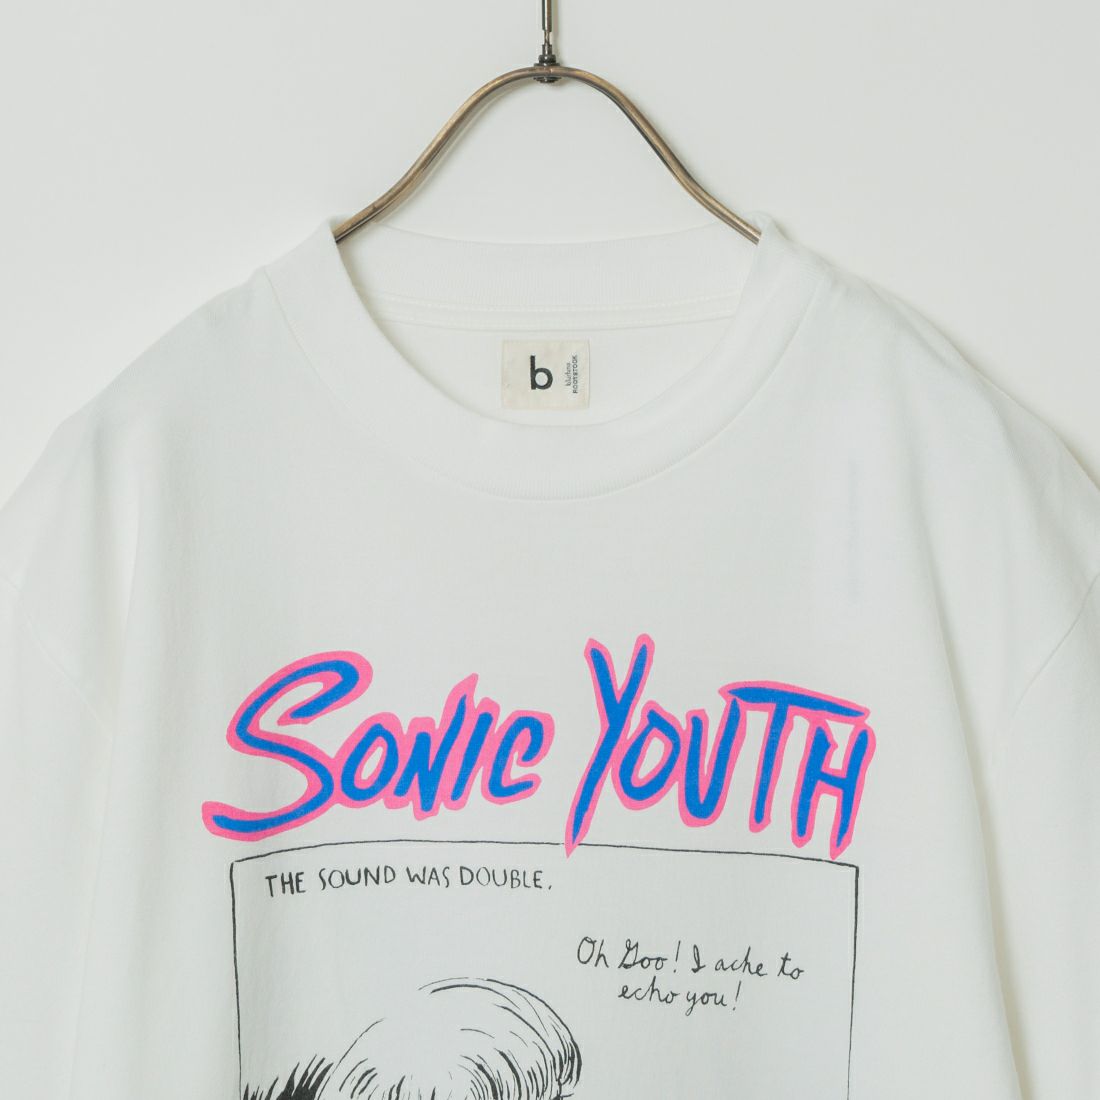 blurhms ROOTSTOCK [ブラームス ルーツストック] Echo スタンダードプリントTシャツ [BROOTS24S33SONIC1] 01 WHITE